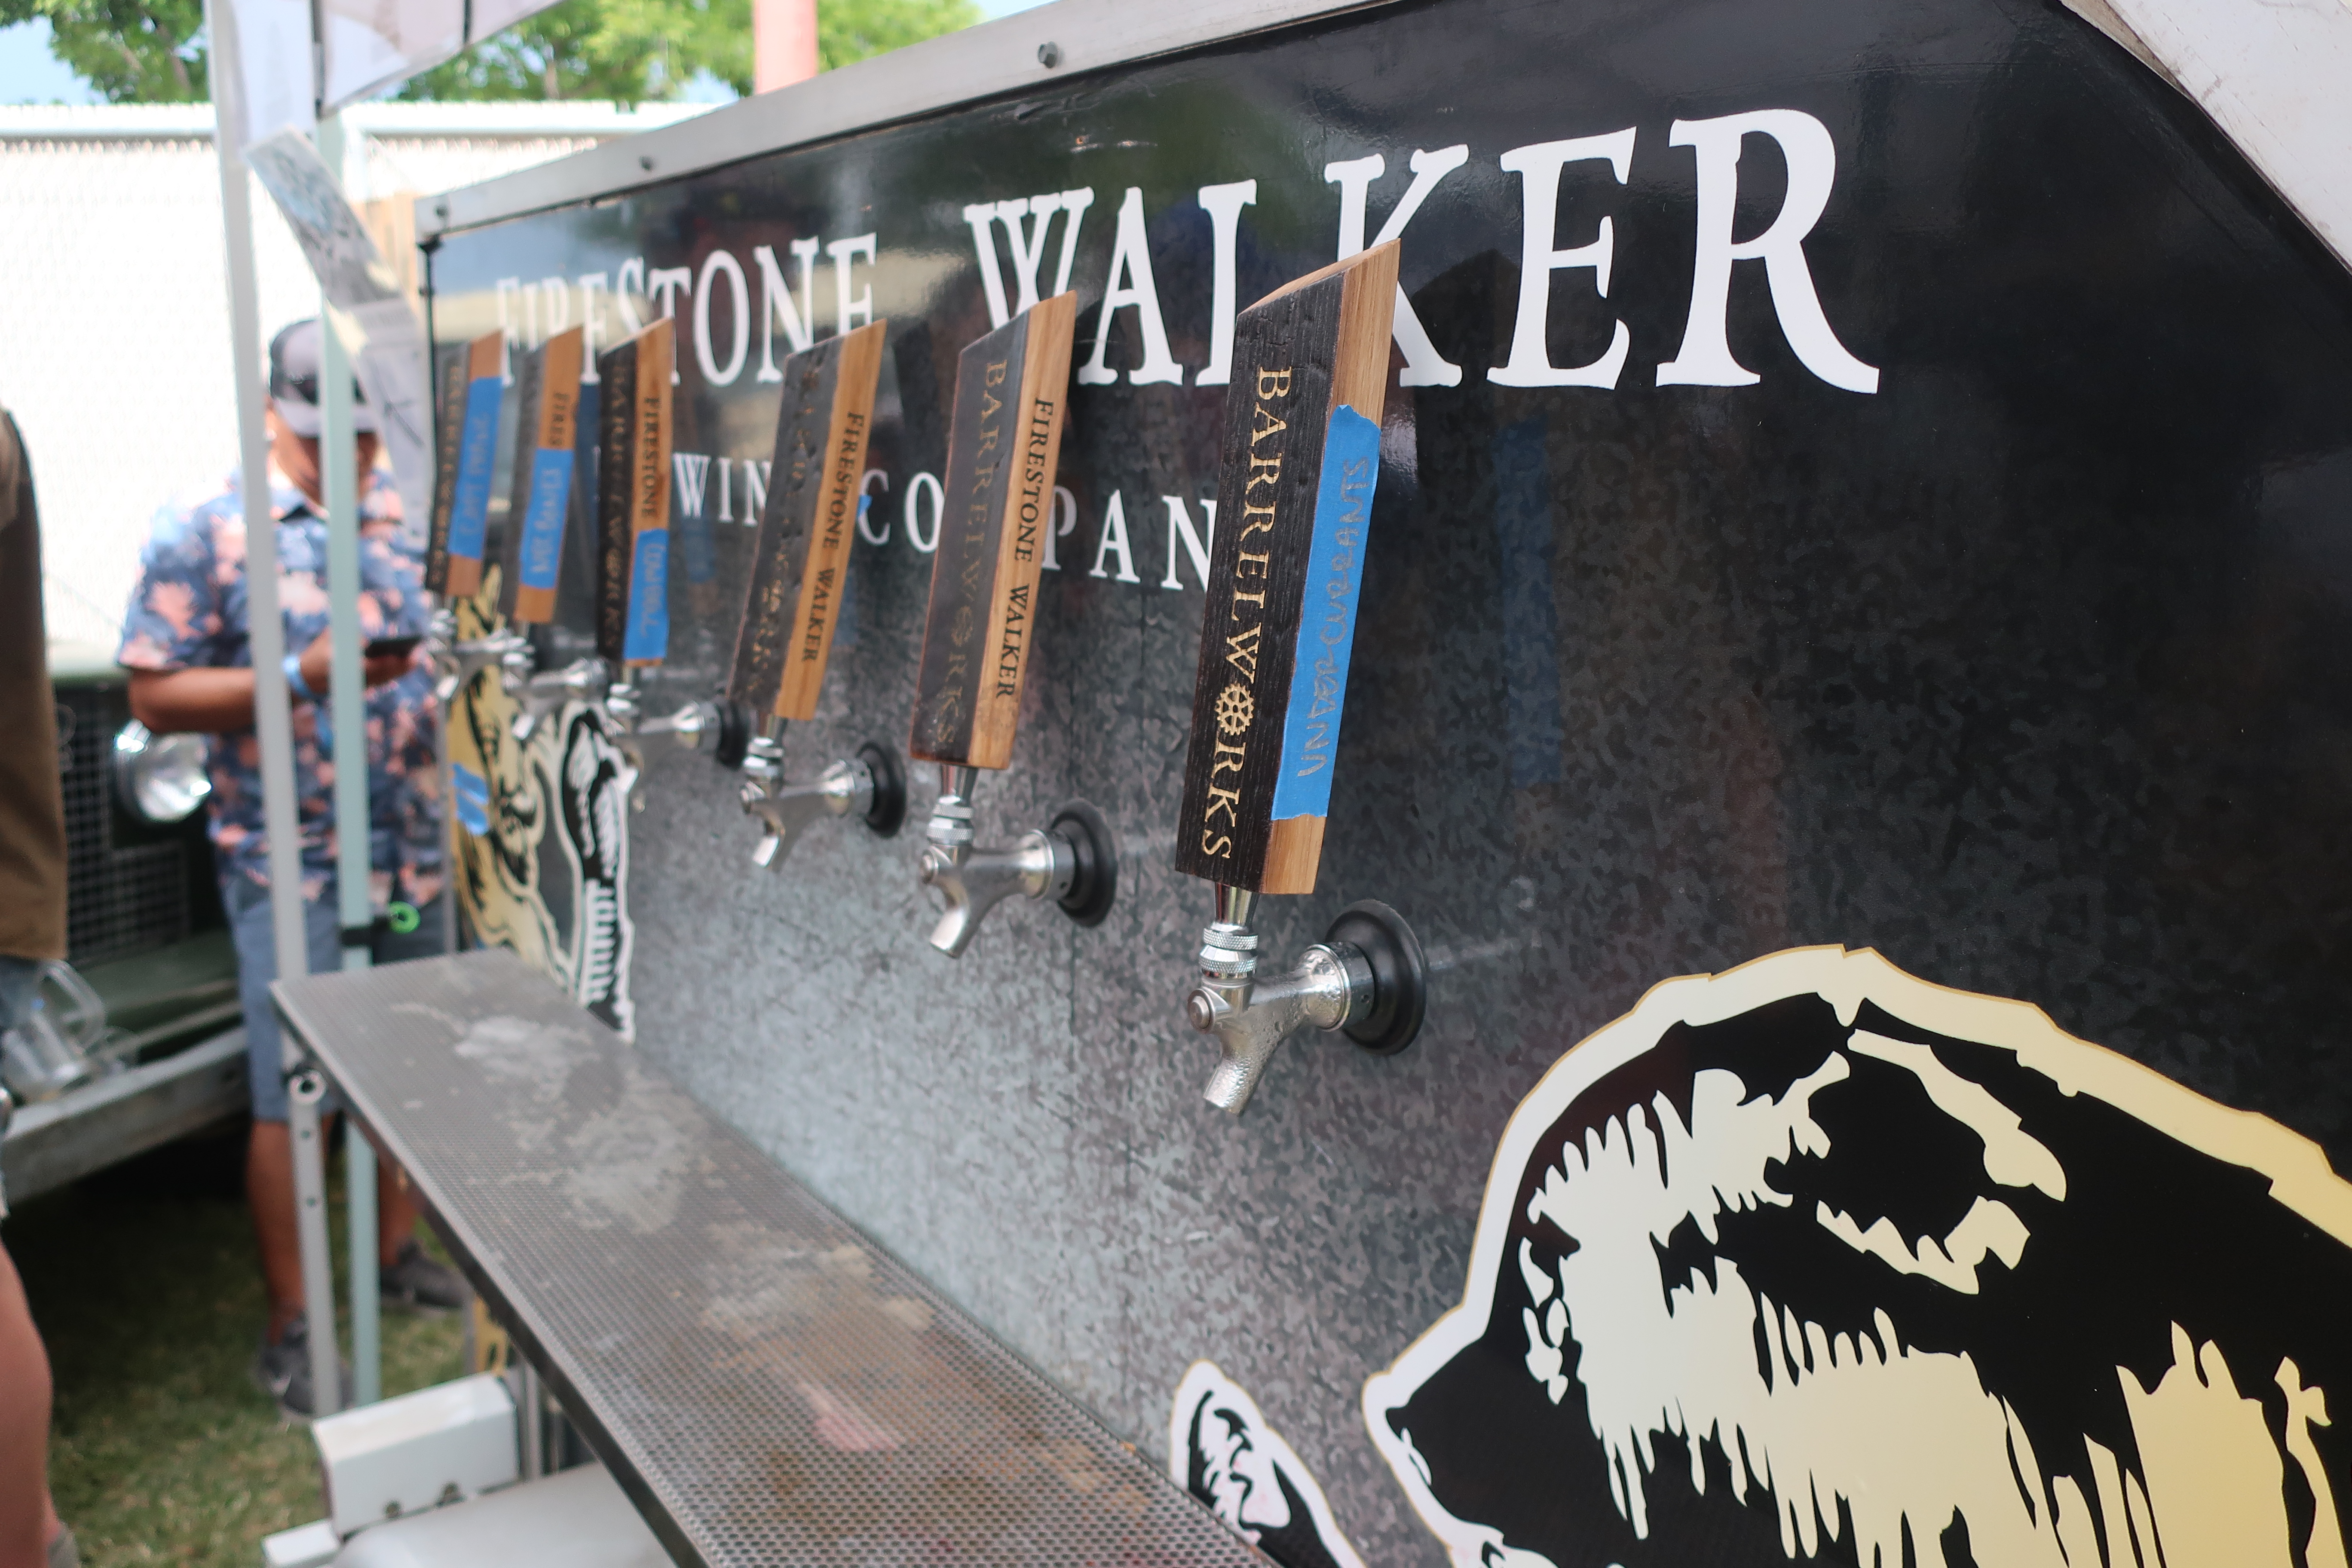 The taps at the Firestone Walker Barrelworks booth during the 2019 Firestone Walker Invitational Beer Fest.